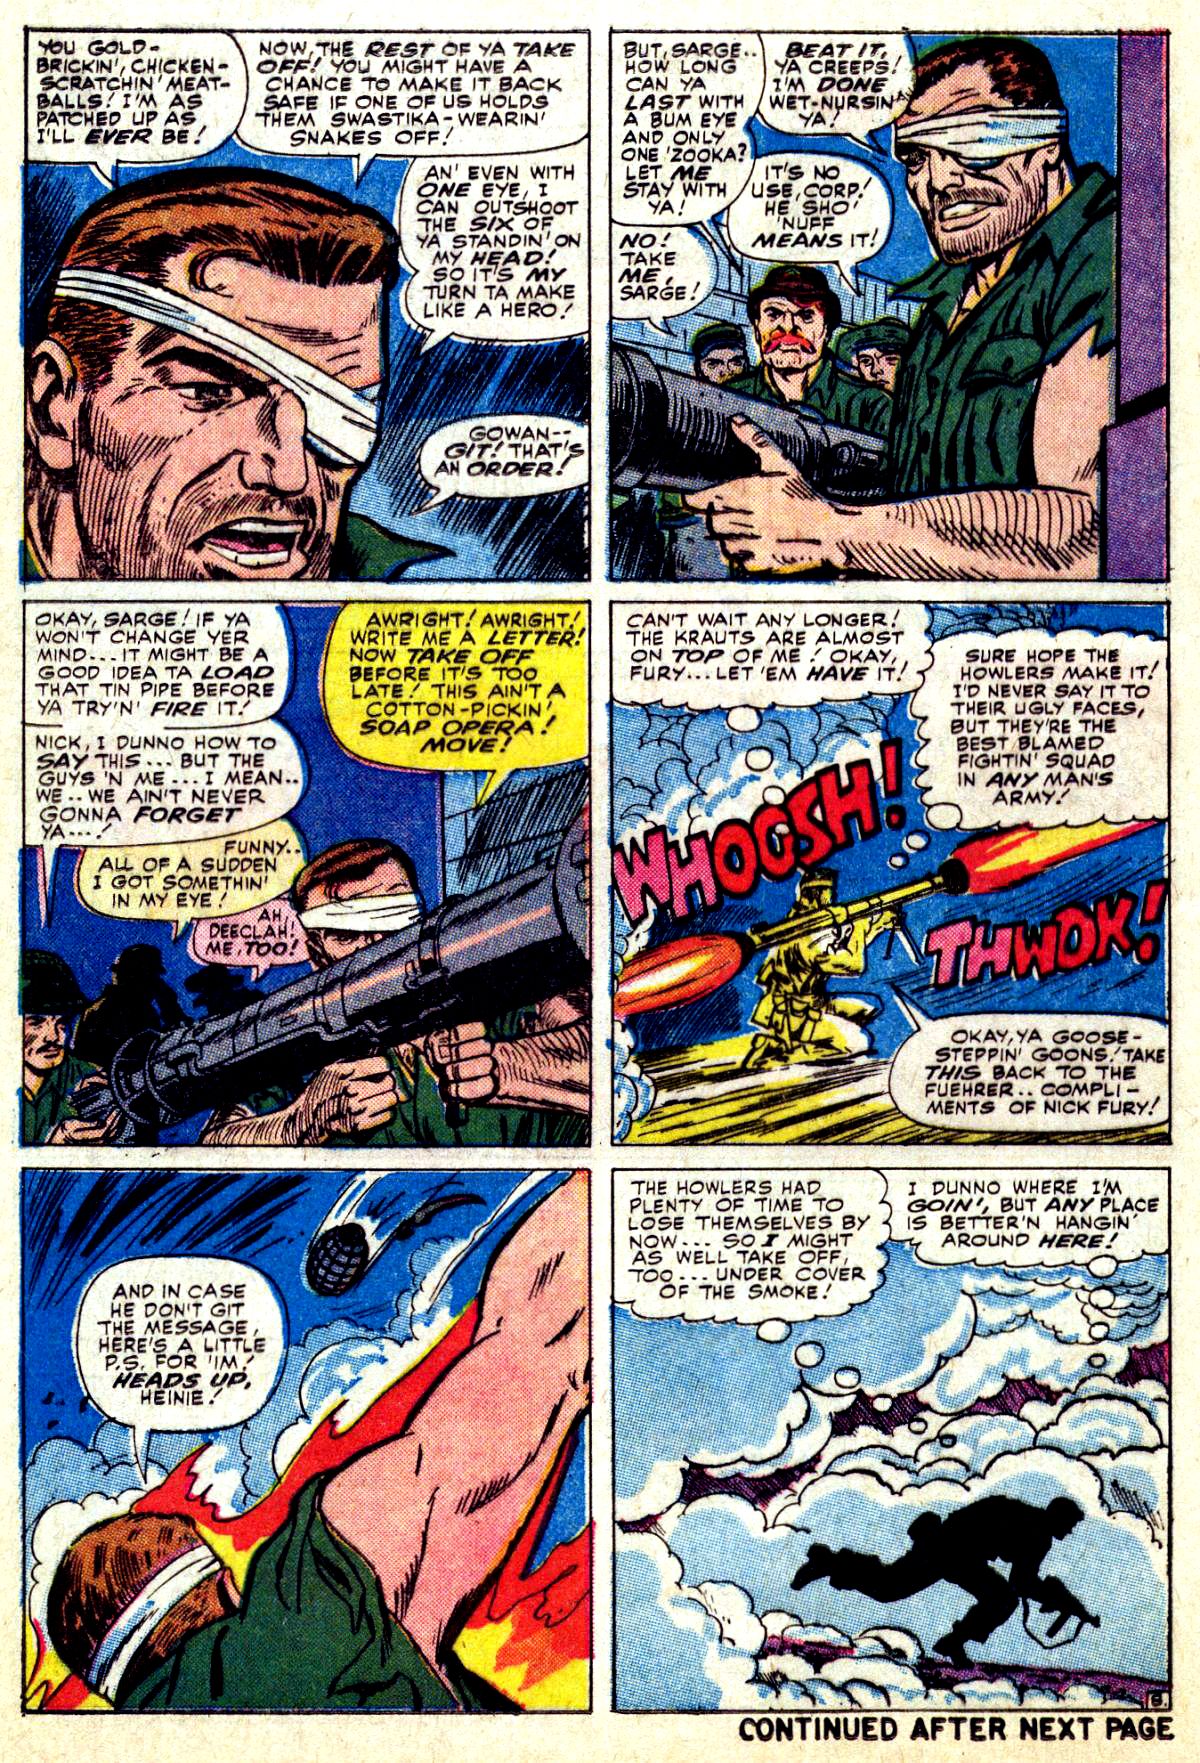 Read online Sgt. Fury comic -  Issue #27 - 12